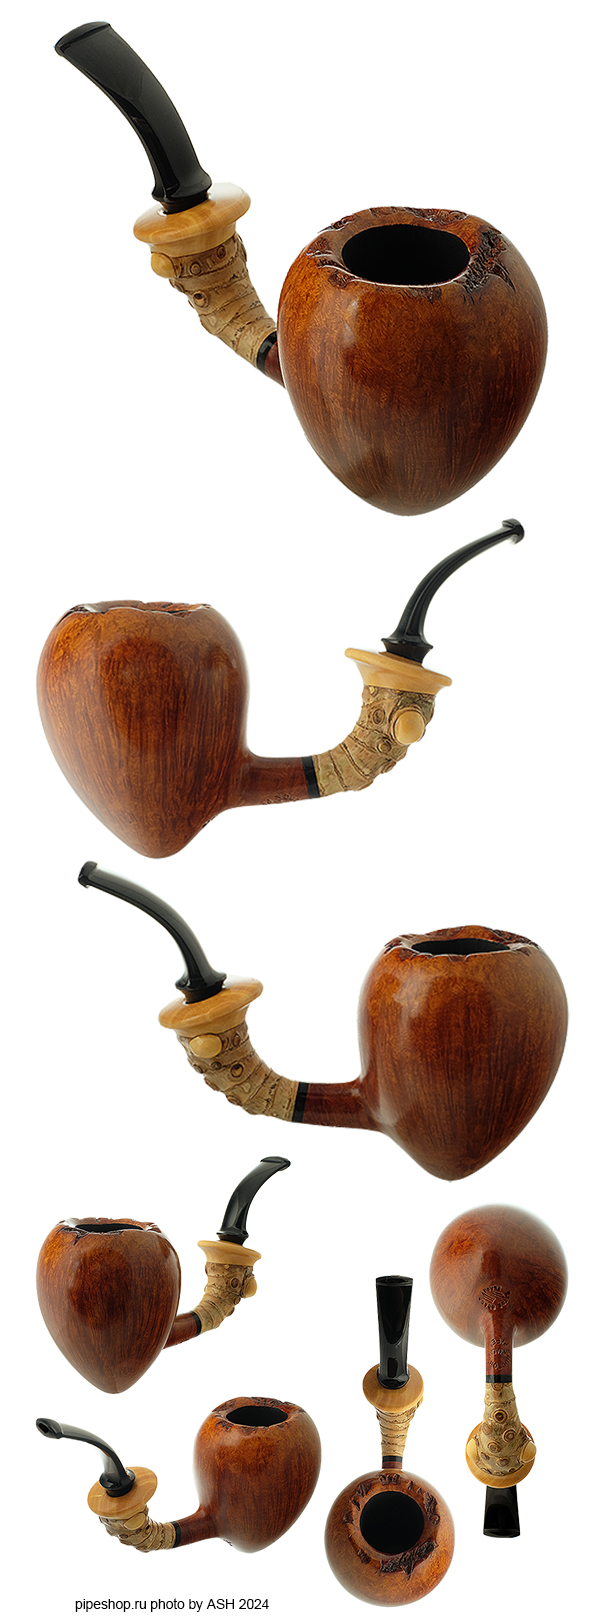   KOVALEV DOCTOR`S PIPES SMOOTH BAMBOO BENT ACORN Grade EXTRA GRAND FLASH